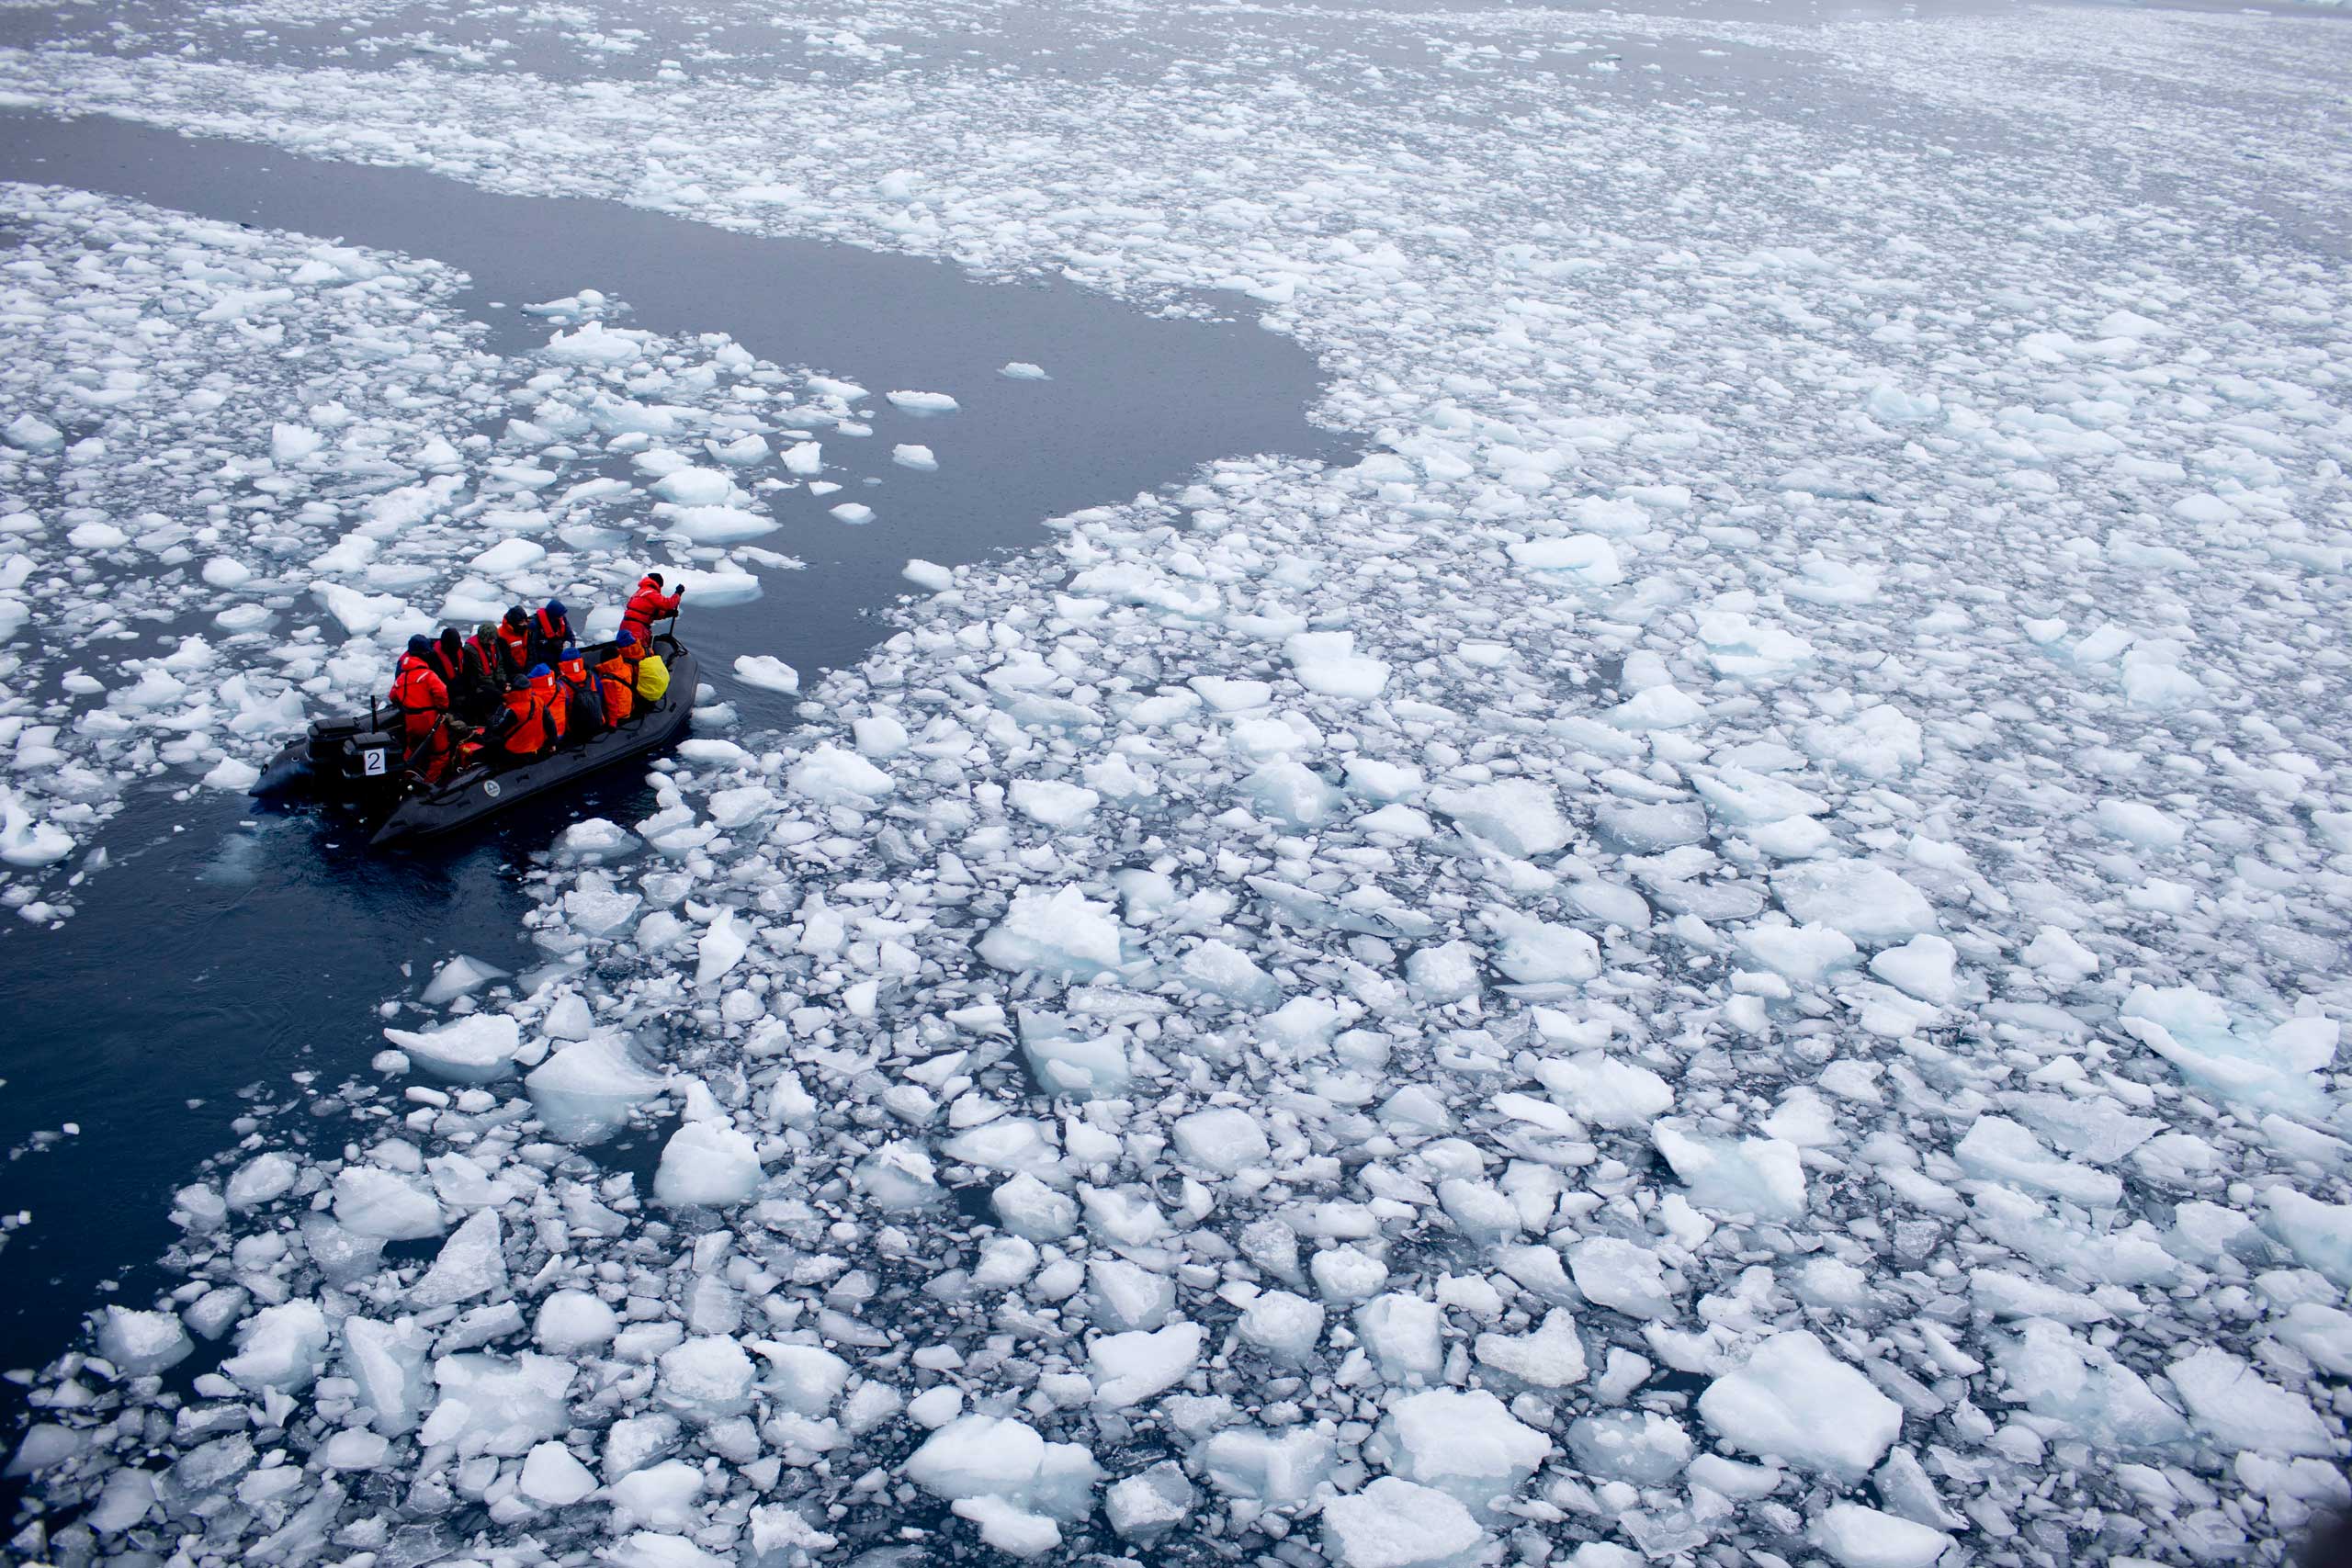 A team of international scientists heads to Chile's station Bernardo O'Higgins, Antarctica on Jan. 22, 2015. Water is eating away at the Antarctic ice, melting it where it hits the oceans. As the ice sheets slowly thaw, water pours into the sea, 130 billion tons of ice (118 billion metric tons) per year for the past decade, according to NASA satellite calculations. (AP Photo/Natacha Pisarenko)